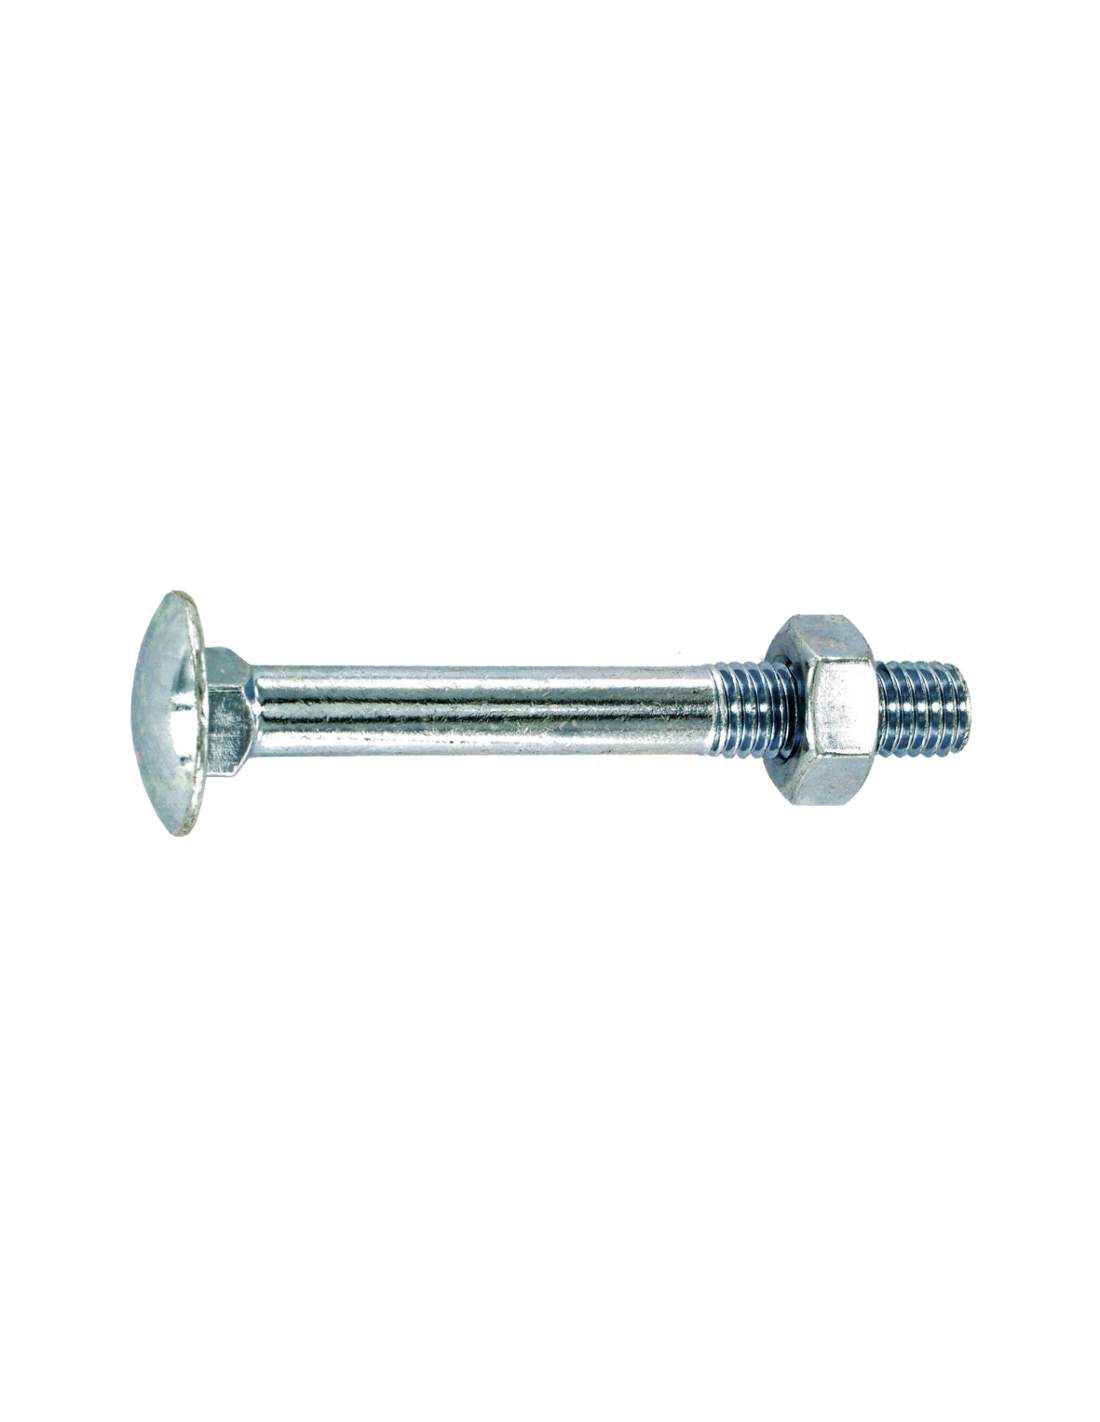 Round head bolt with square collar in galvanized steel 6x40mm, 5 pcs.